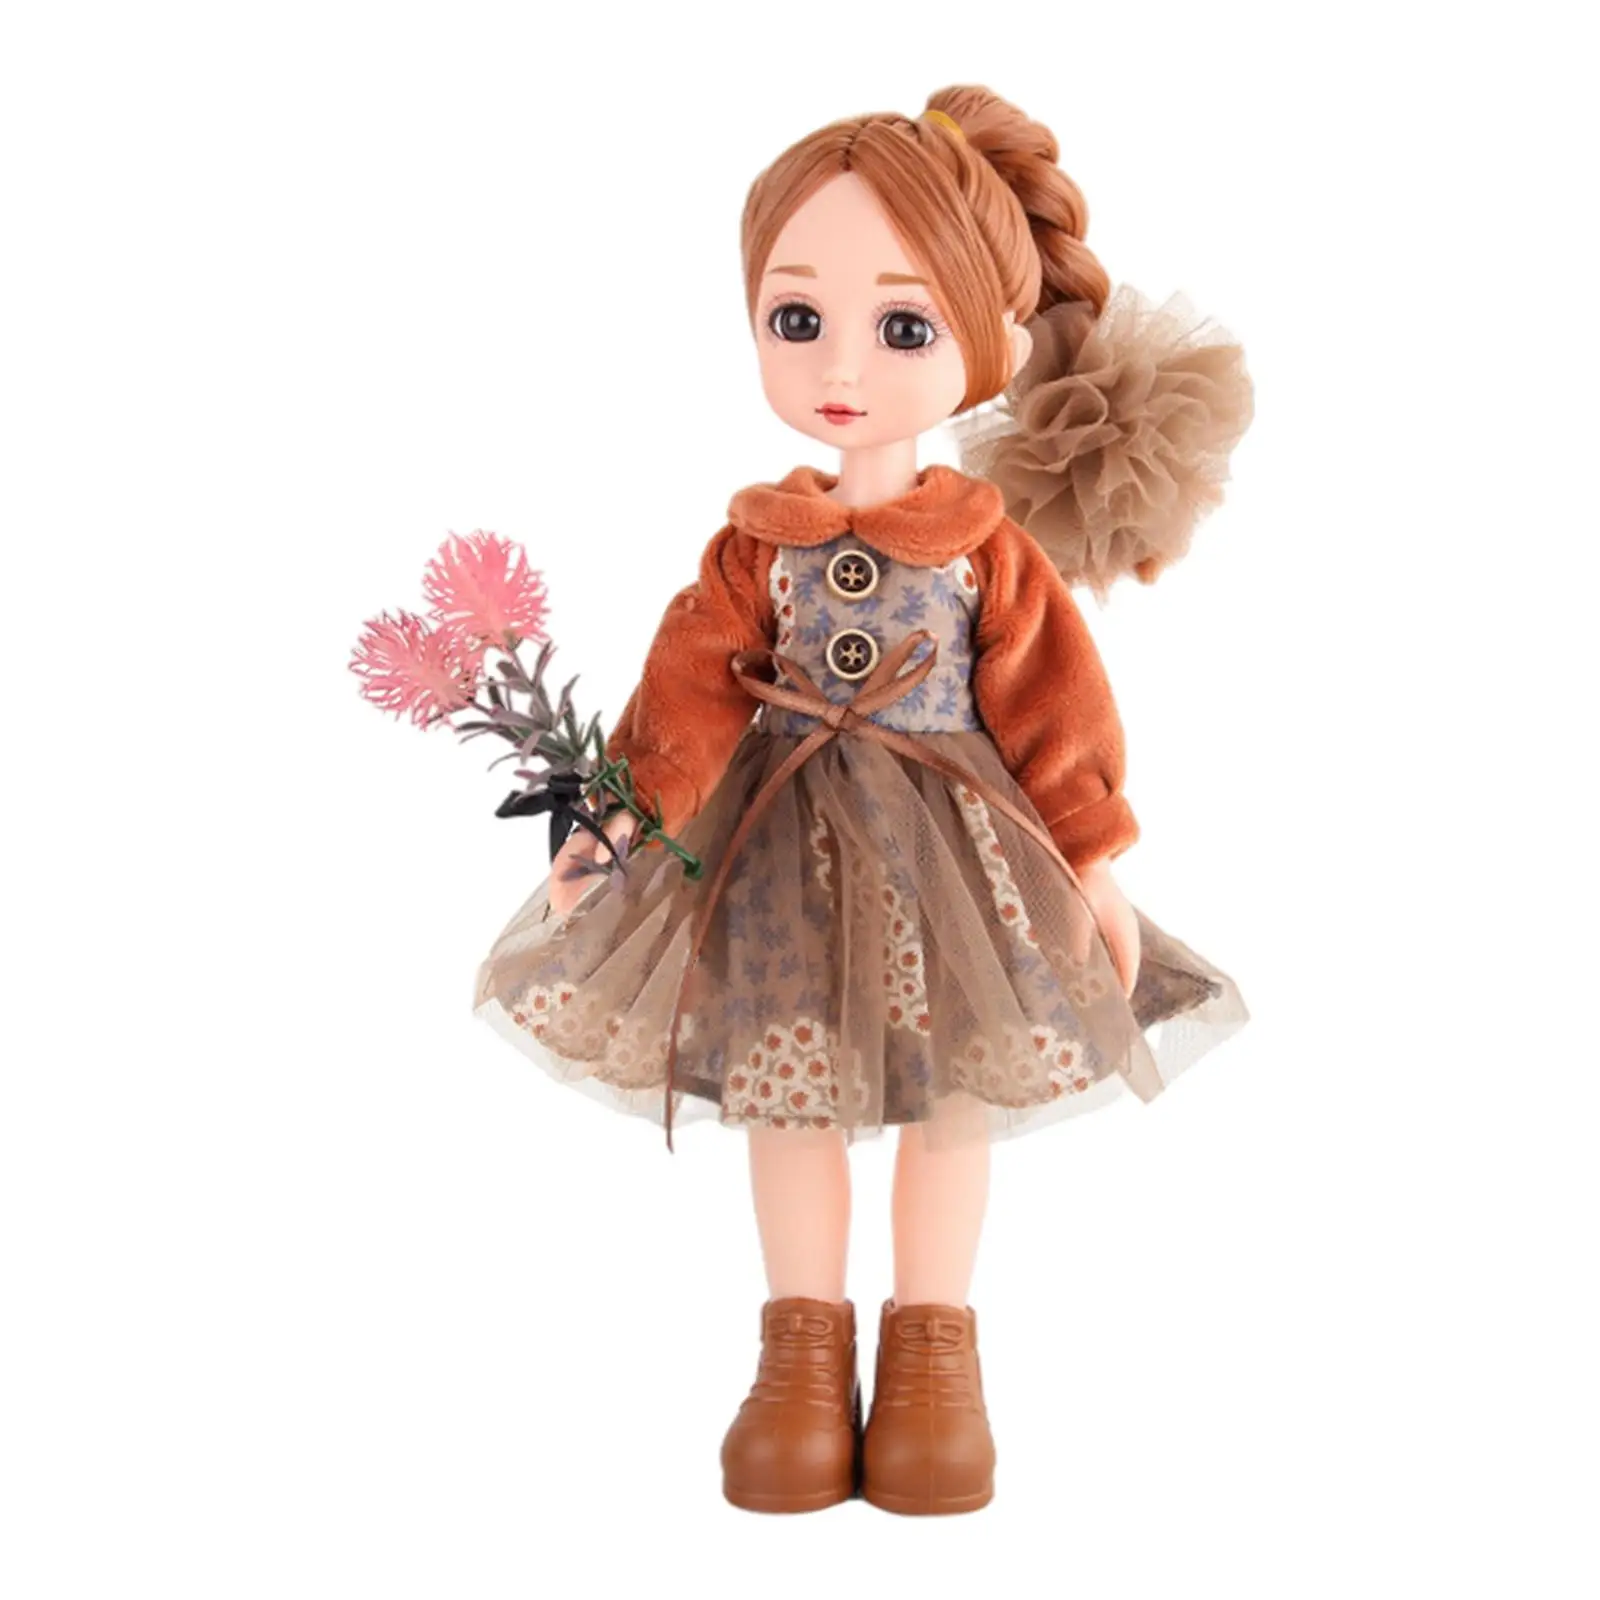 Cute Baby Doll Princess Doll Collection Outfit Fashion Dress 30cm Girl Doll for Girls